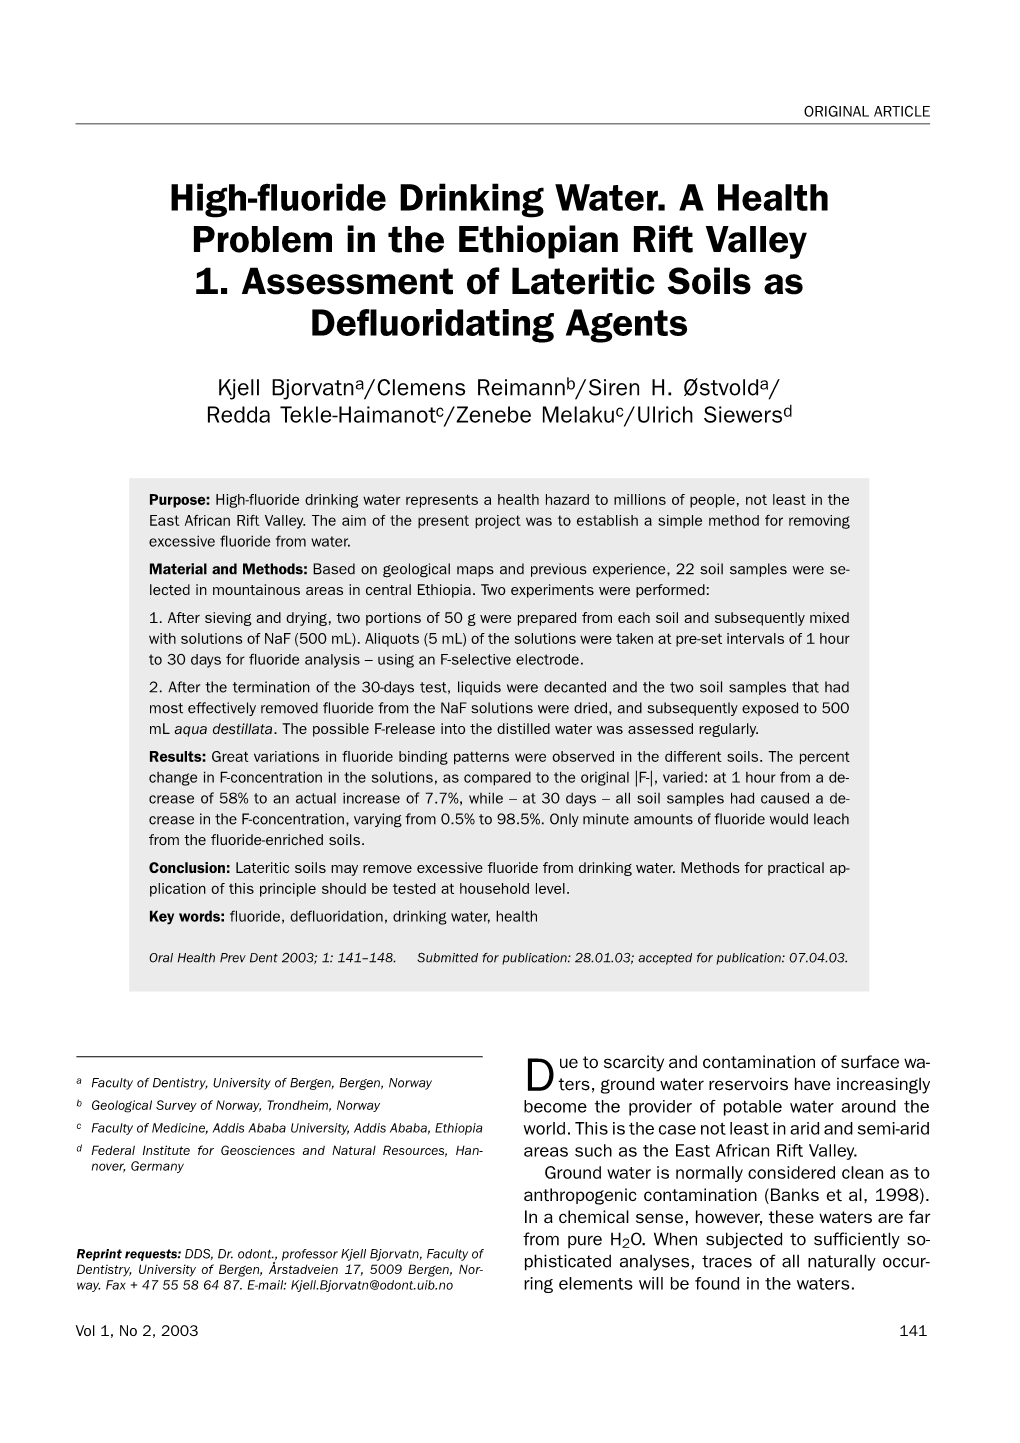 High-Fluoride Drinking Water. a Health Problem in the Ethiopian Rift Valley 1